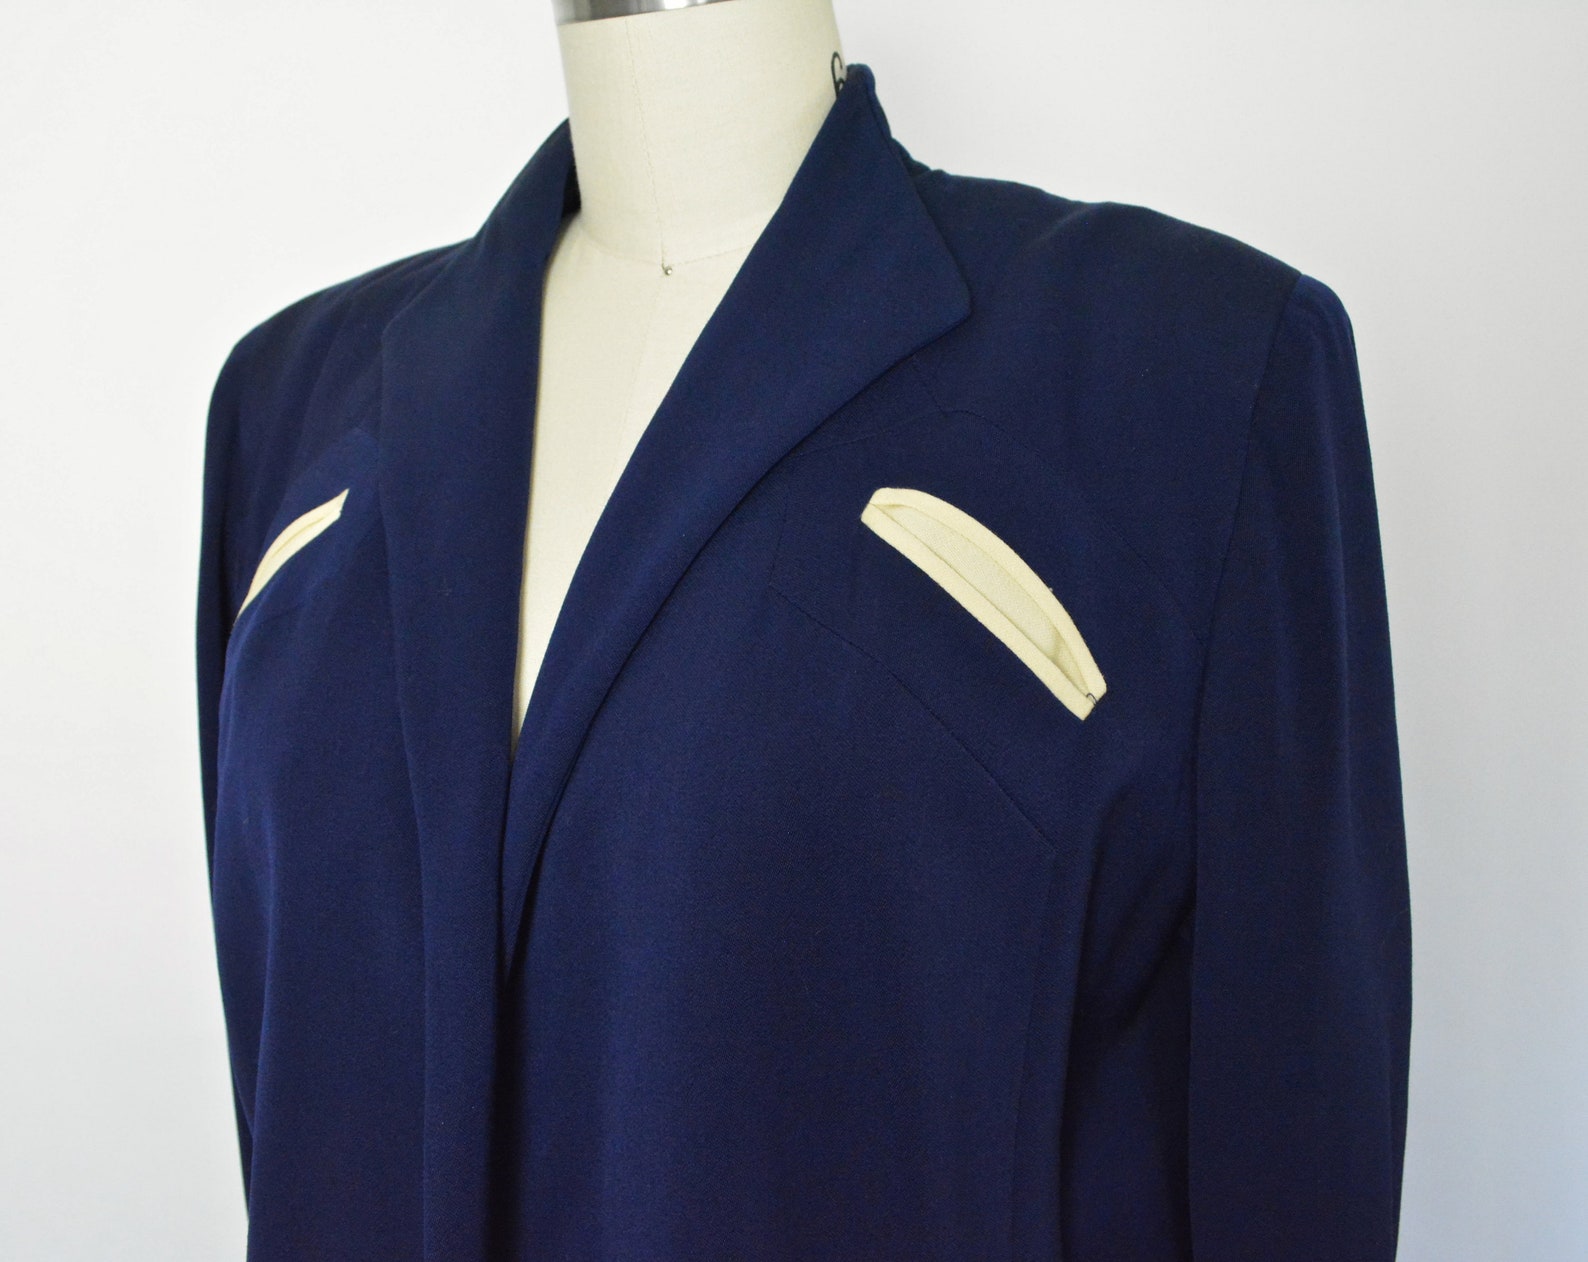 Vintage 1940s Gabardine Suit 40s Blue and White Jacket and - Etsy